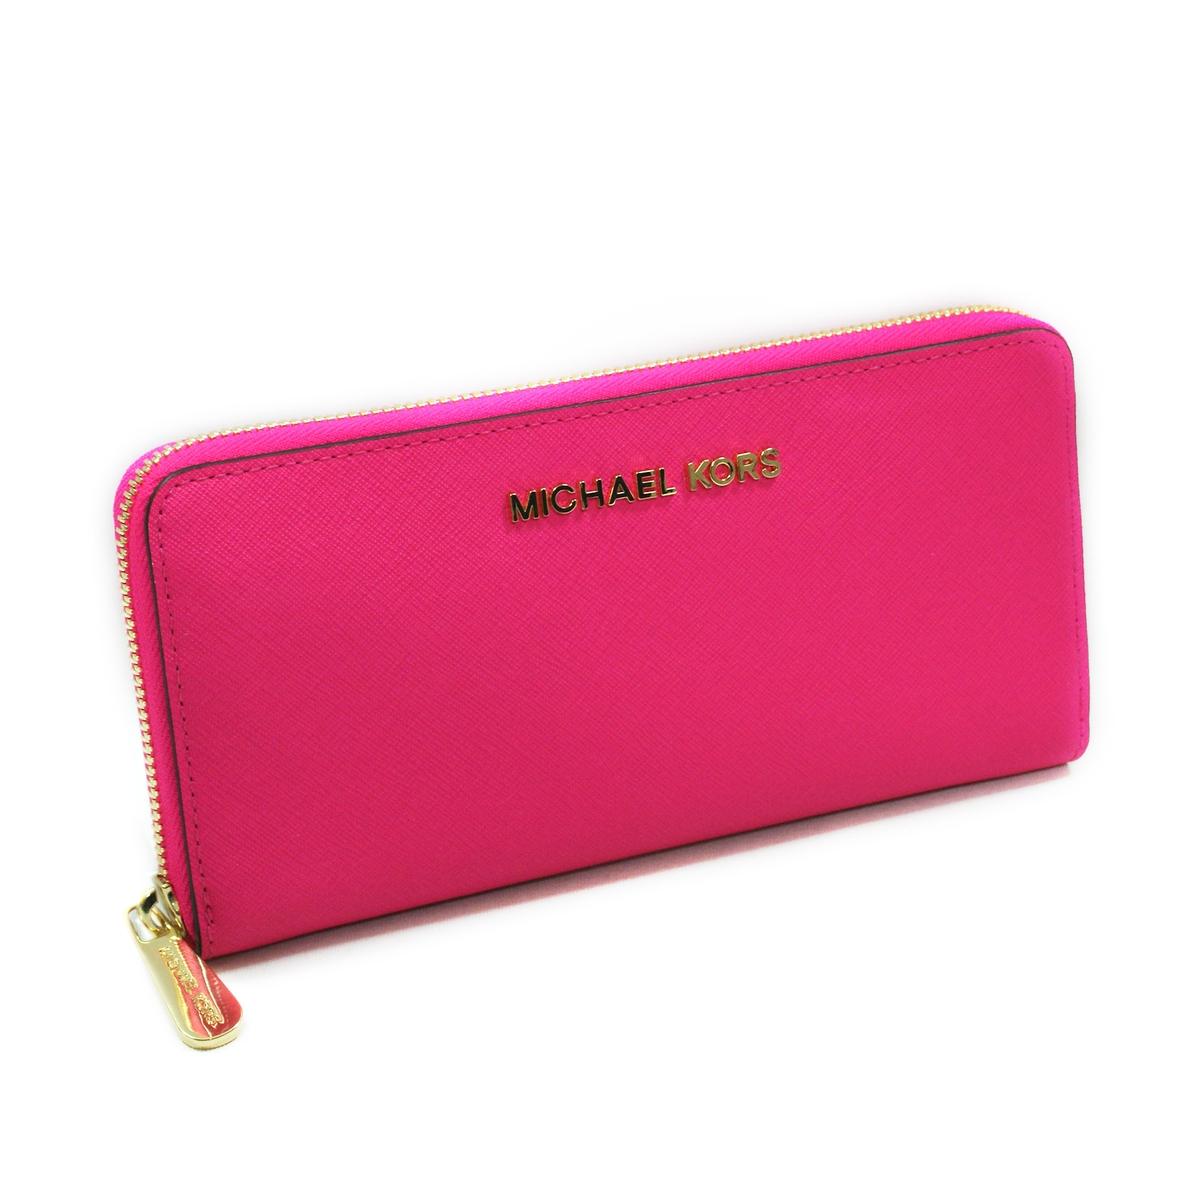 Michael Kors Hot Pink Wallet | Confederated Tribes of the Umatilla Indian Reservation